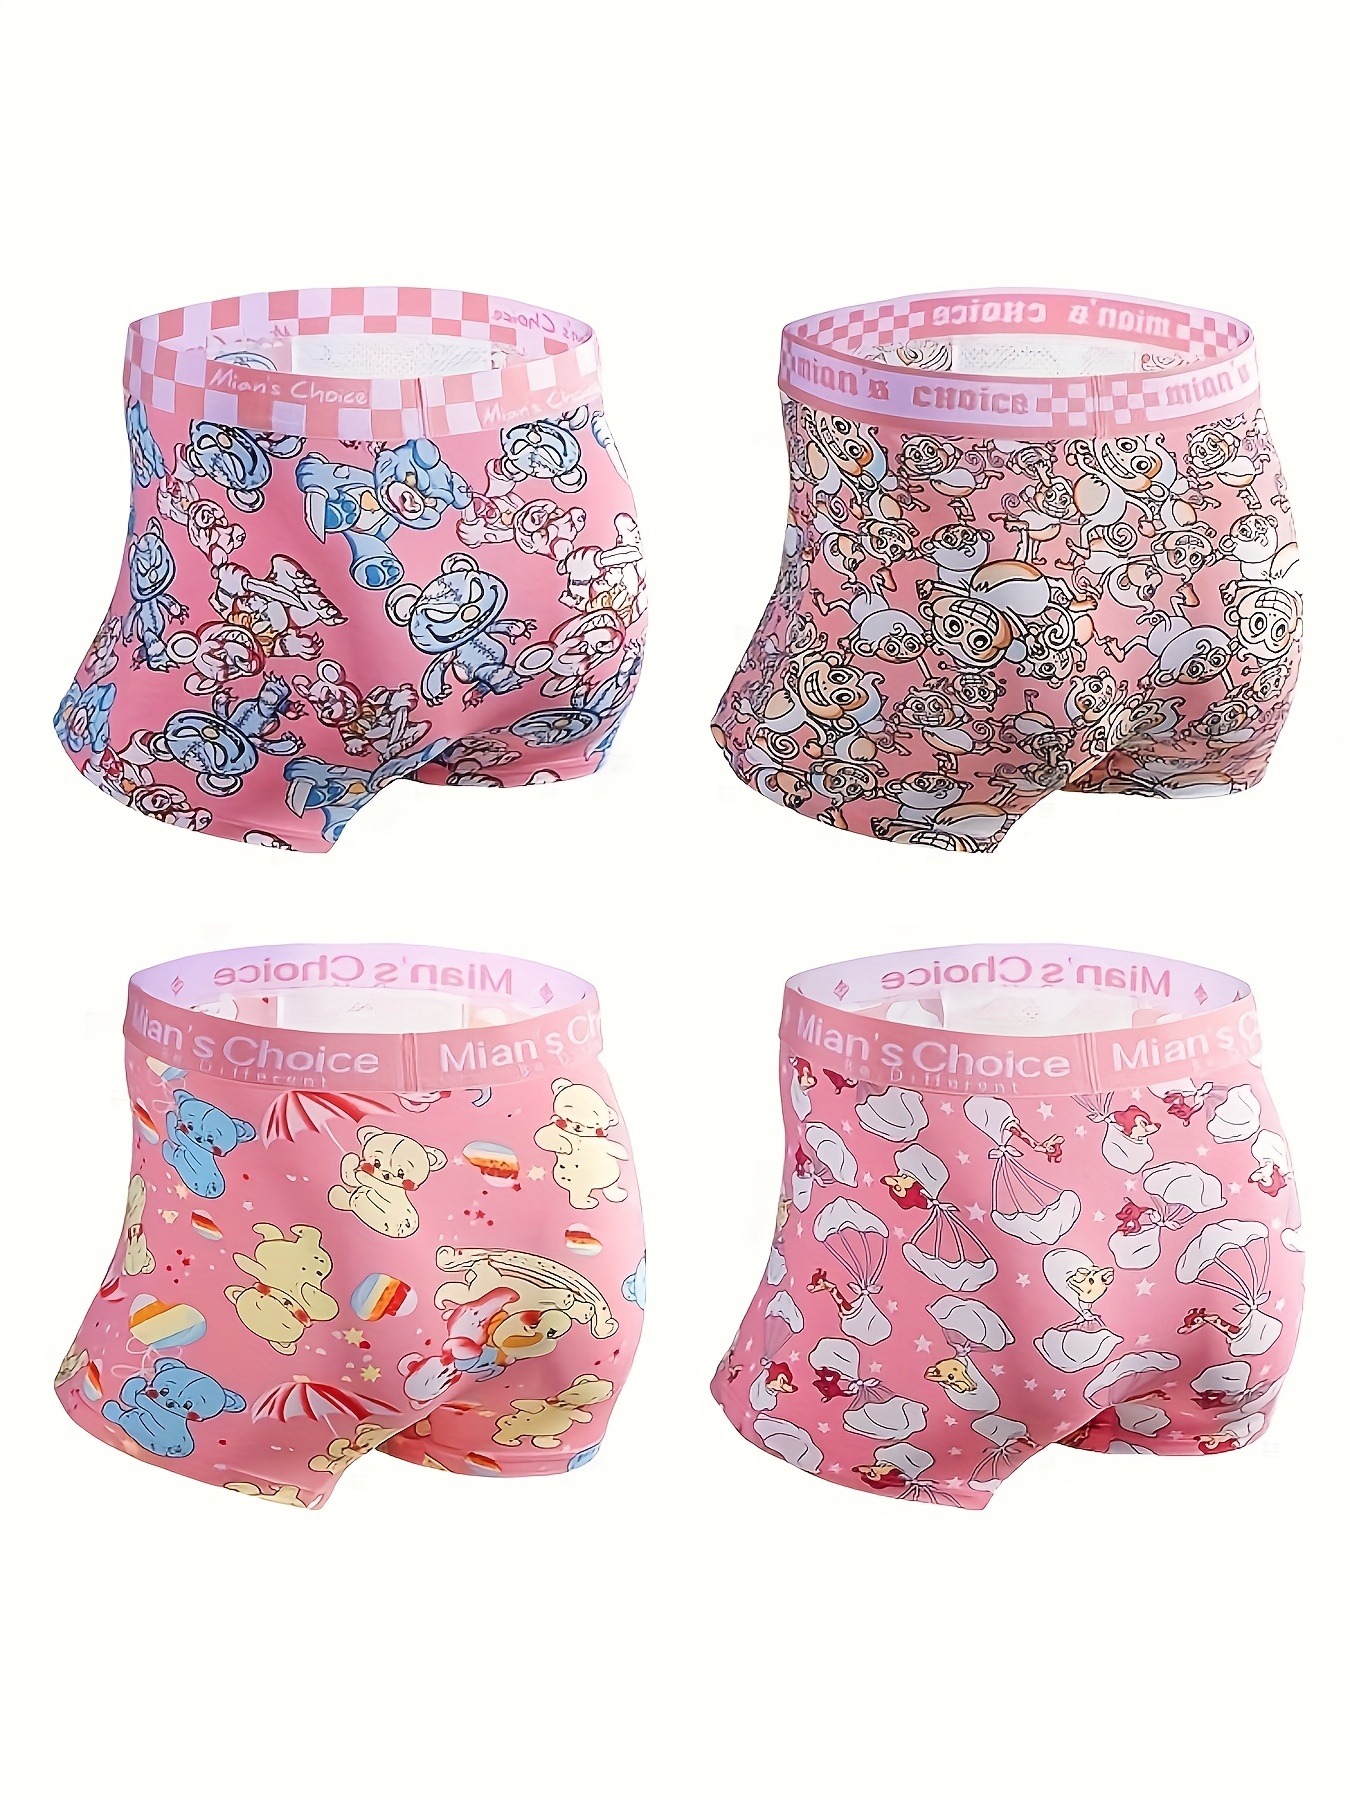 Find Women Boxers Underwear For Ultimate Comfort And Cuteness